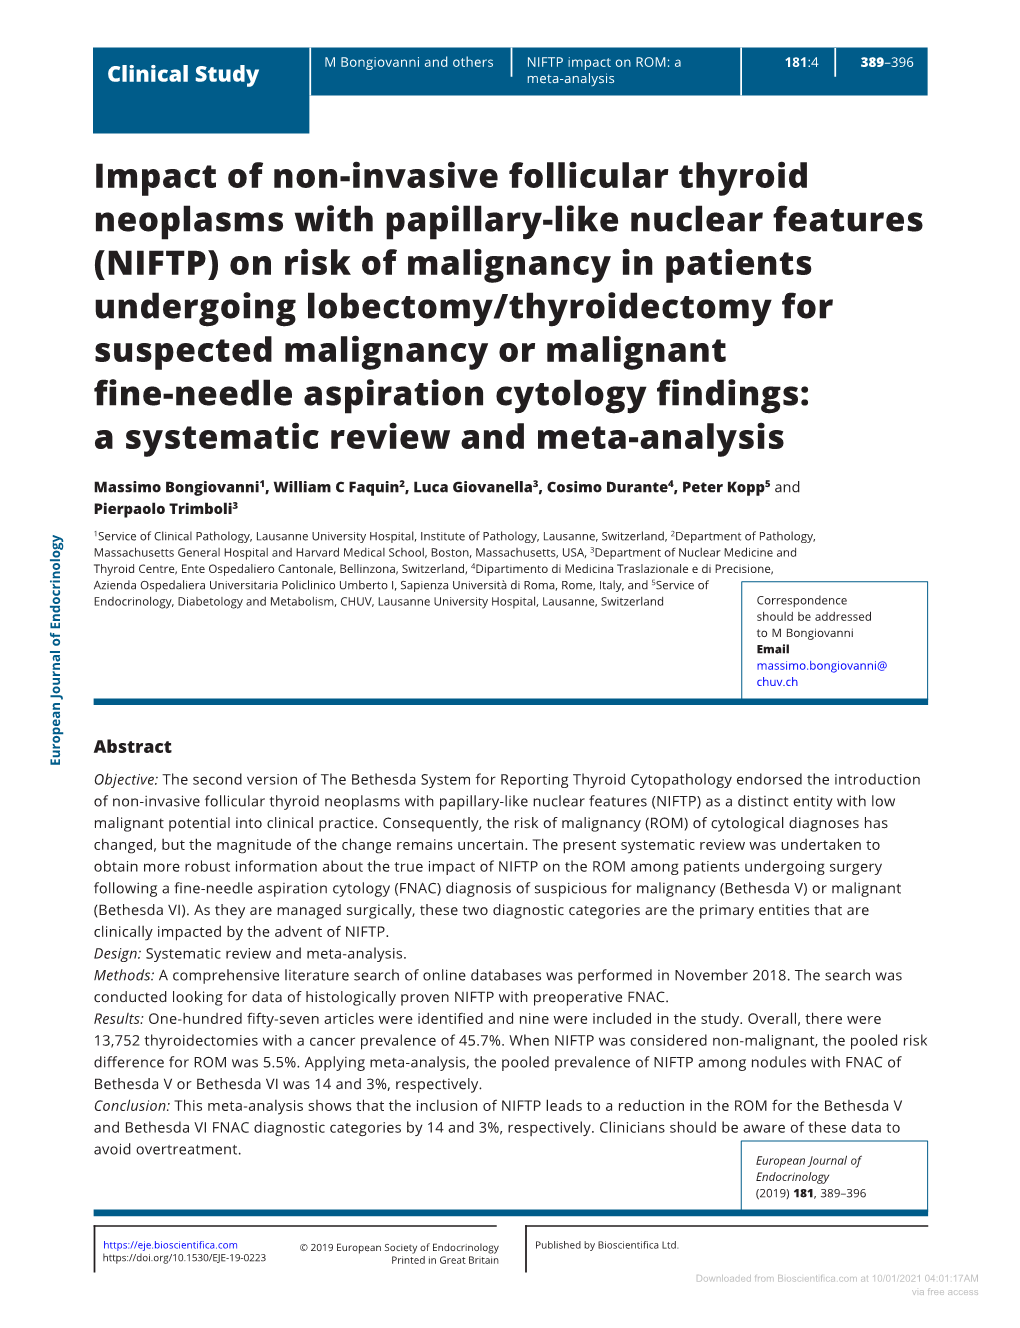 Impact of Non-Invasive Follicular Thyroid Neoplasms with Papillary